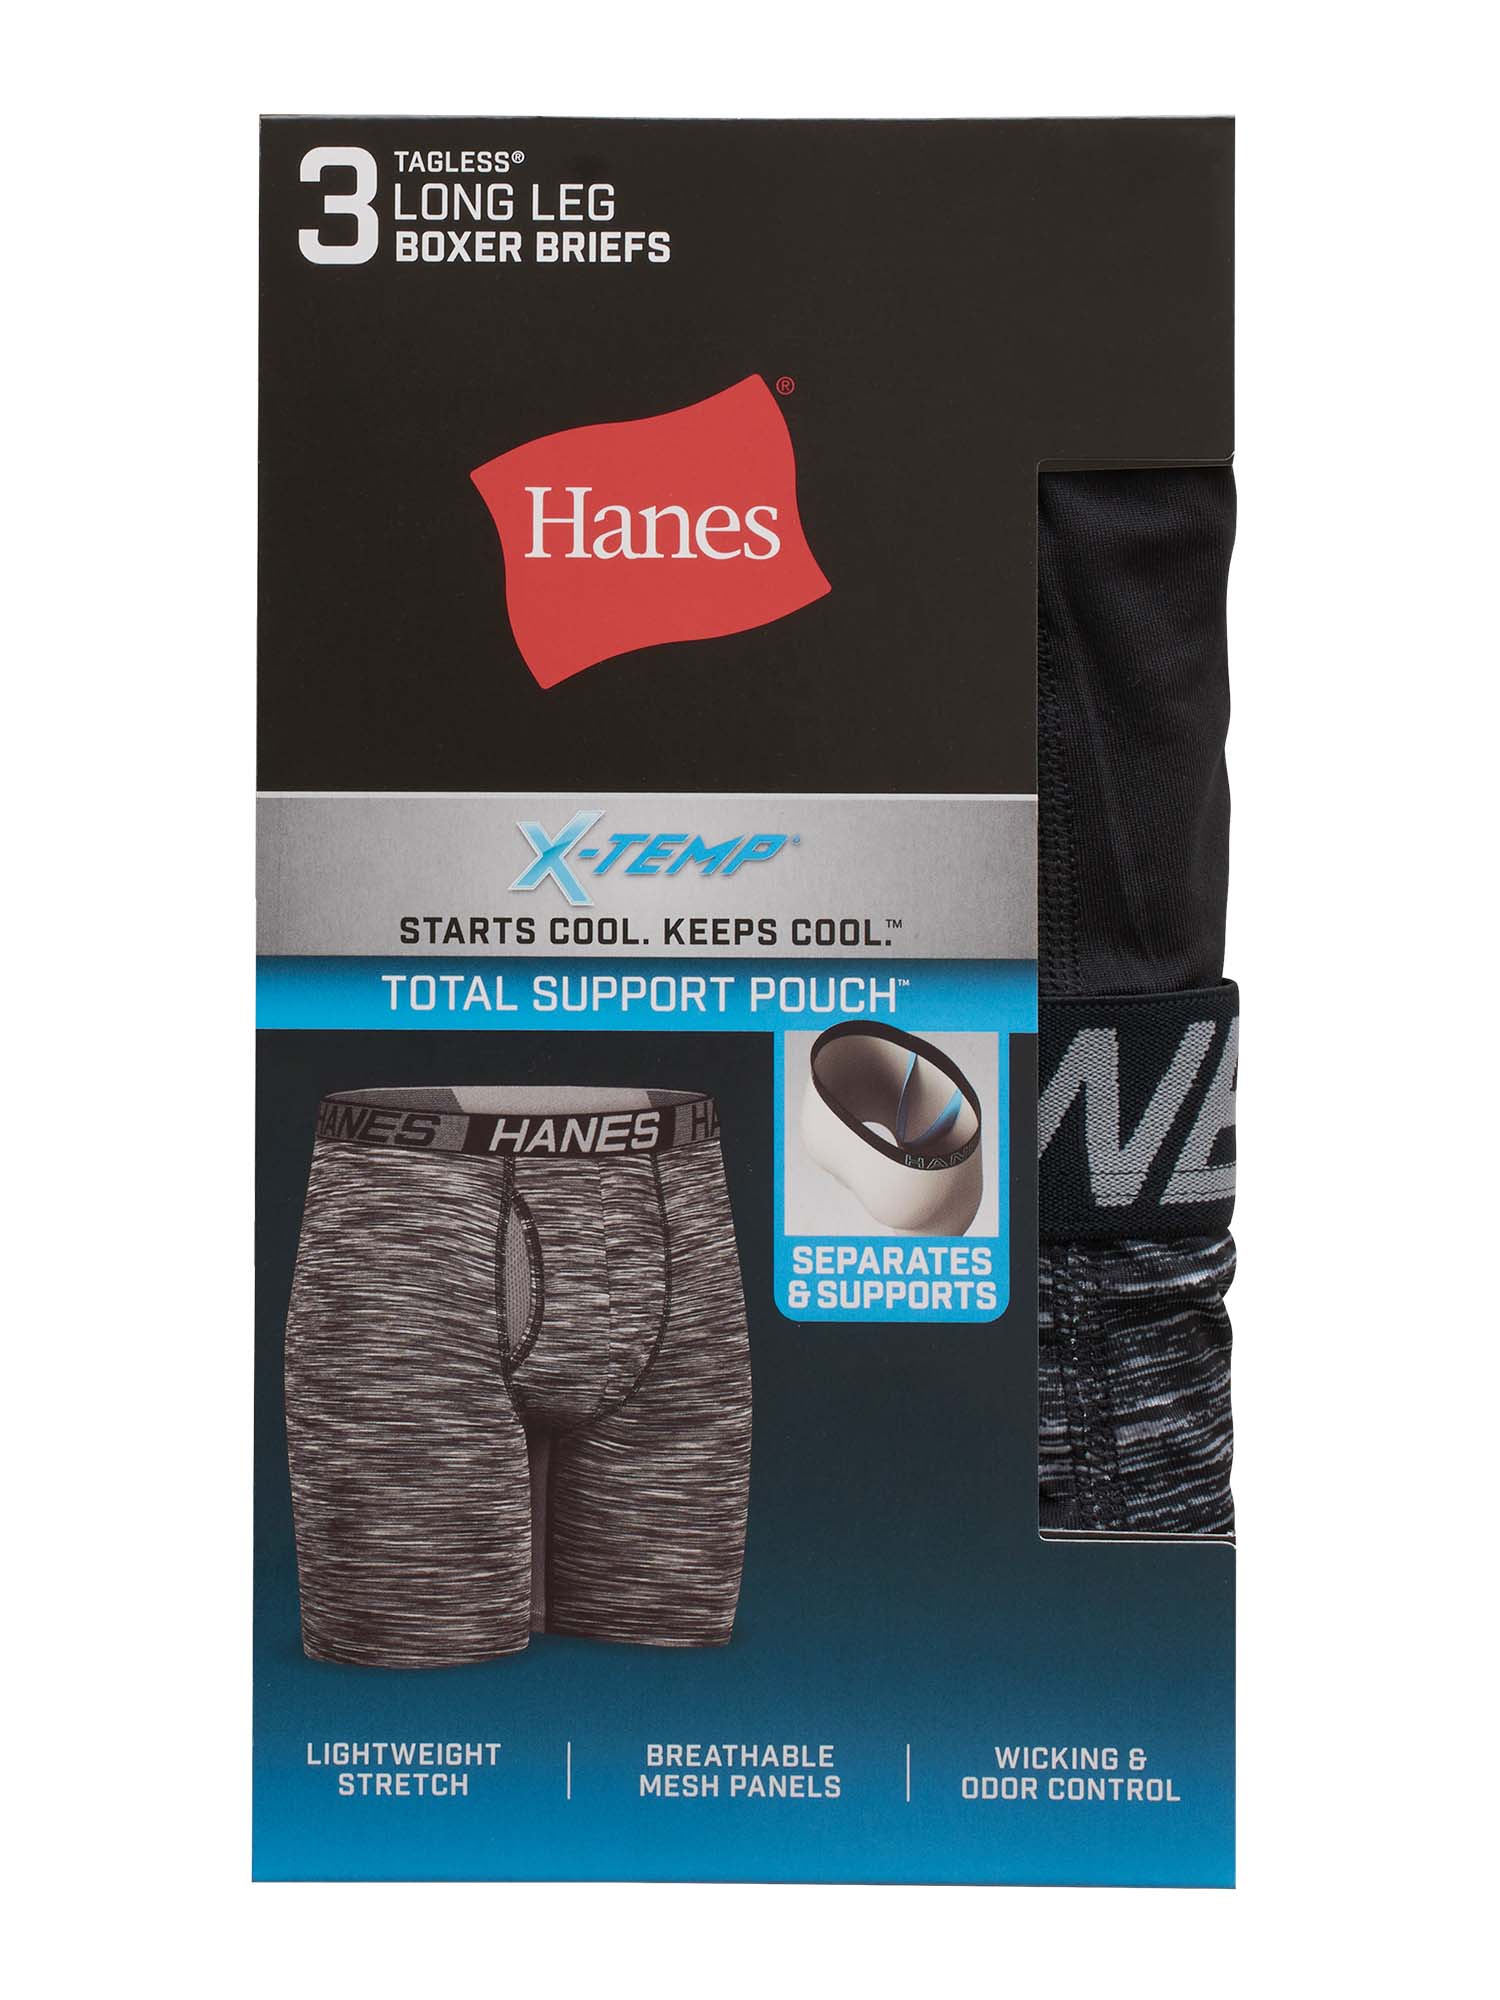 Hanes X-Temp Total Support Pouch Men's Long Leg Boxer Briefs, Anti-Chafing Underwear, 3-Pack - image 3 of 10